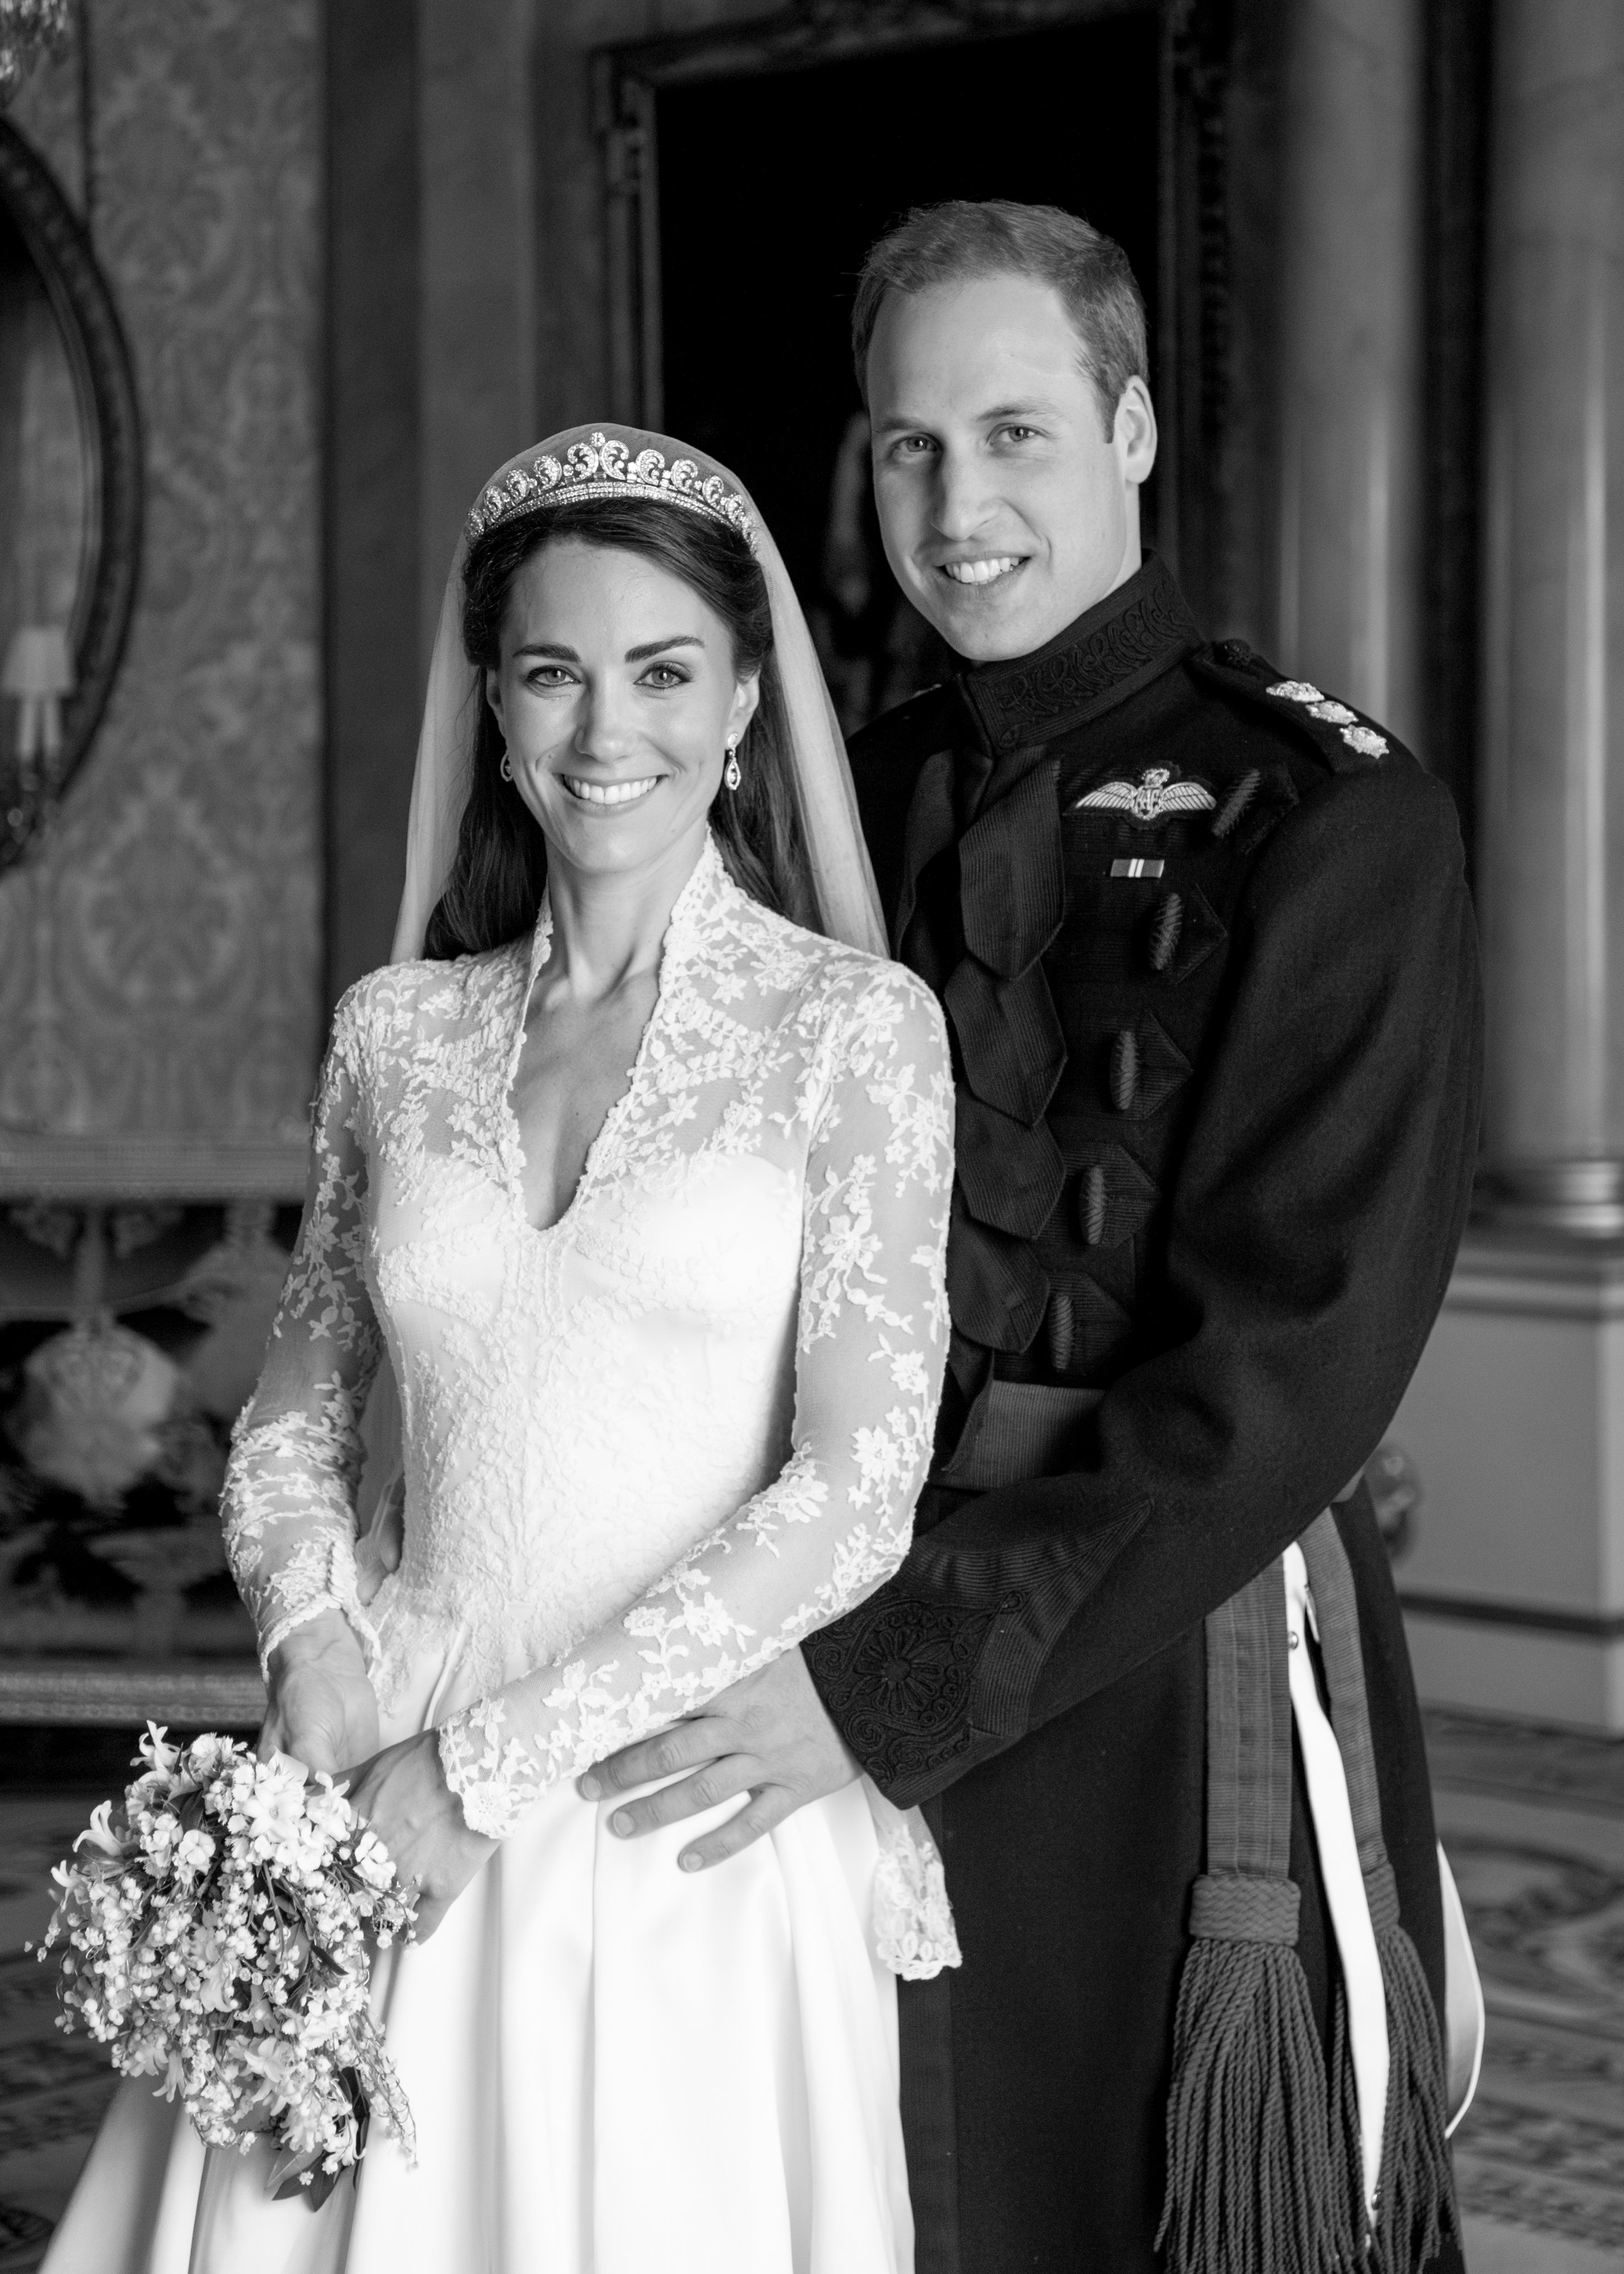 A a black and white portrait of Prince William and Catherine on their wedding day